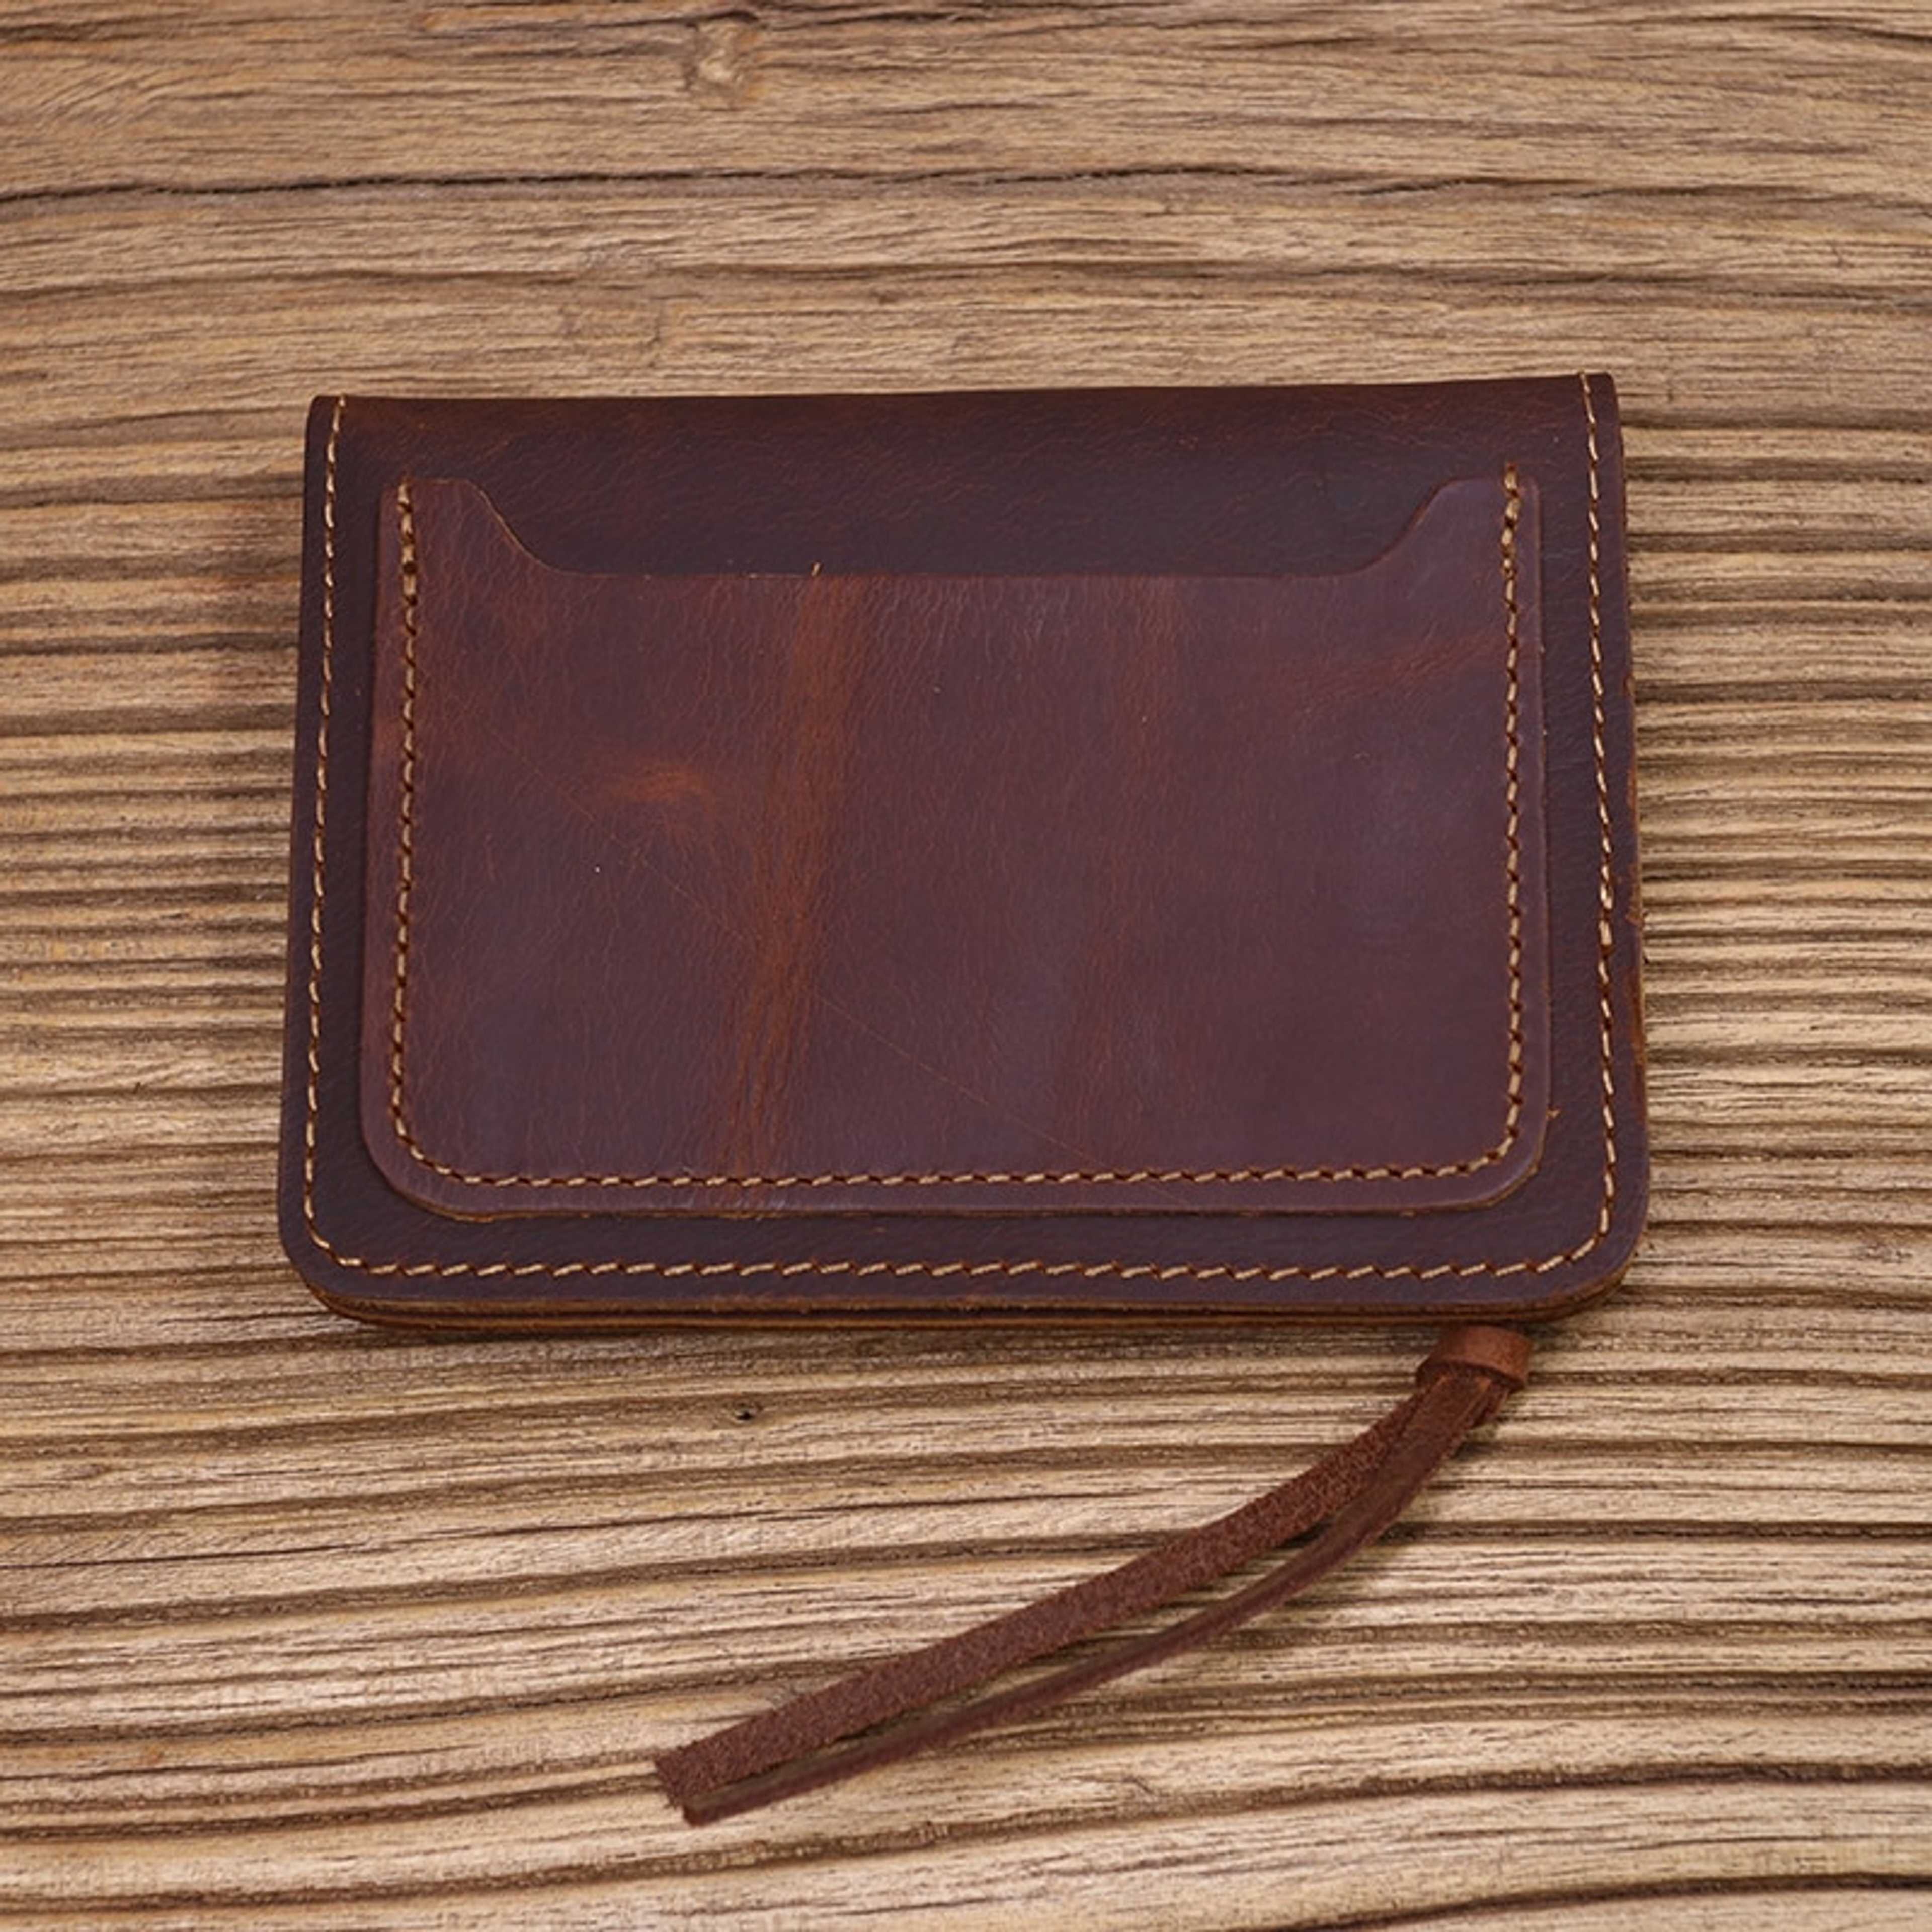 New best quality leather wallets